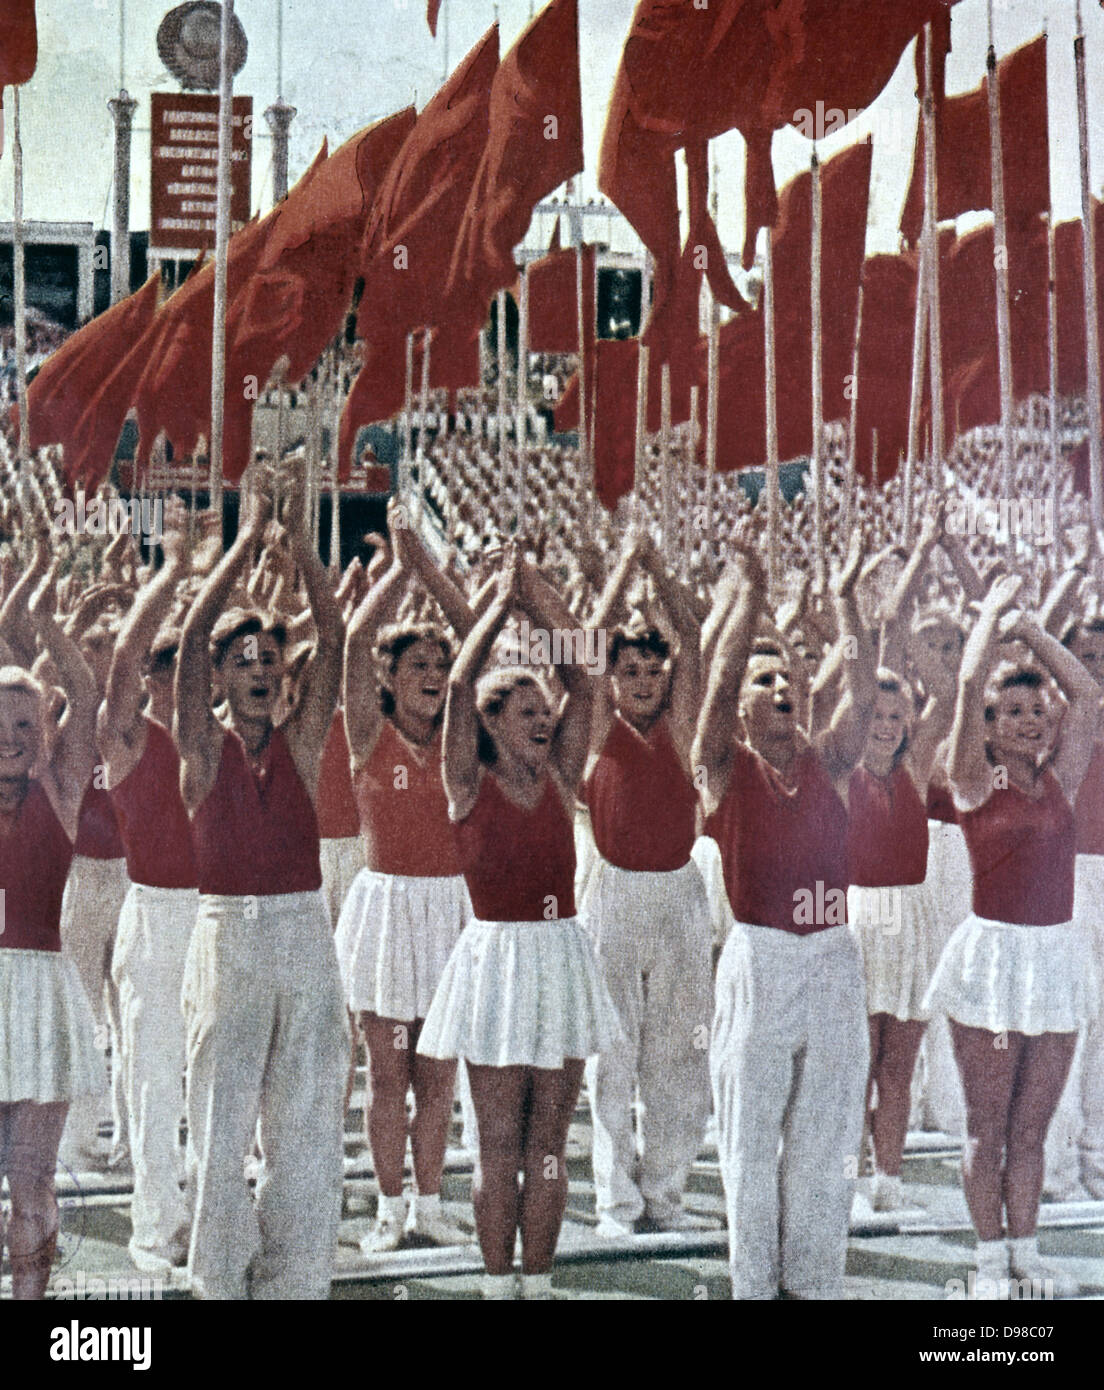 Gymnasts parading at a Festival of Youth, in the USSR, 1950. Stock Photo